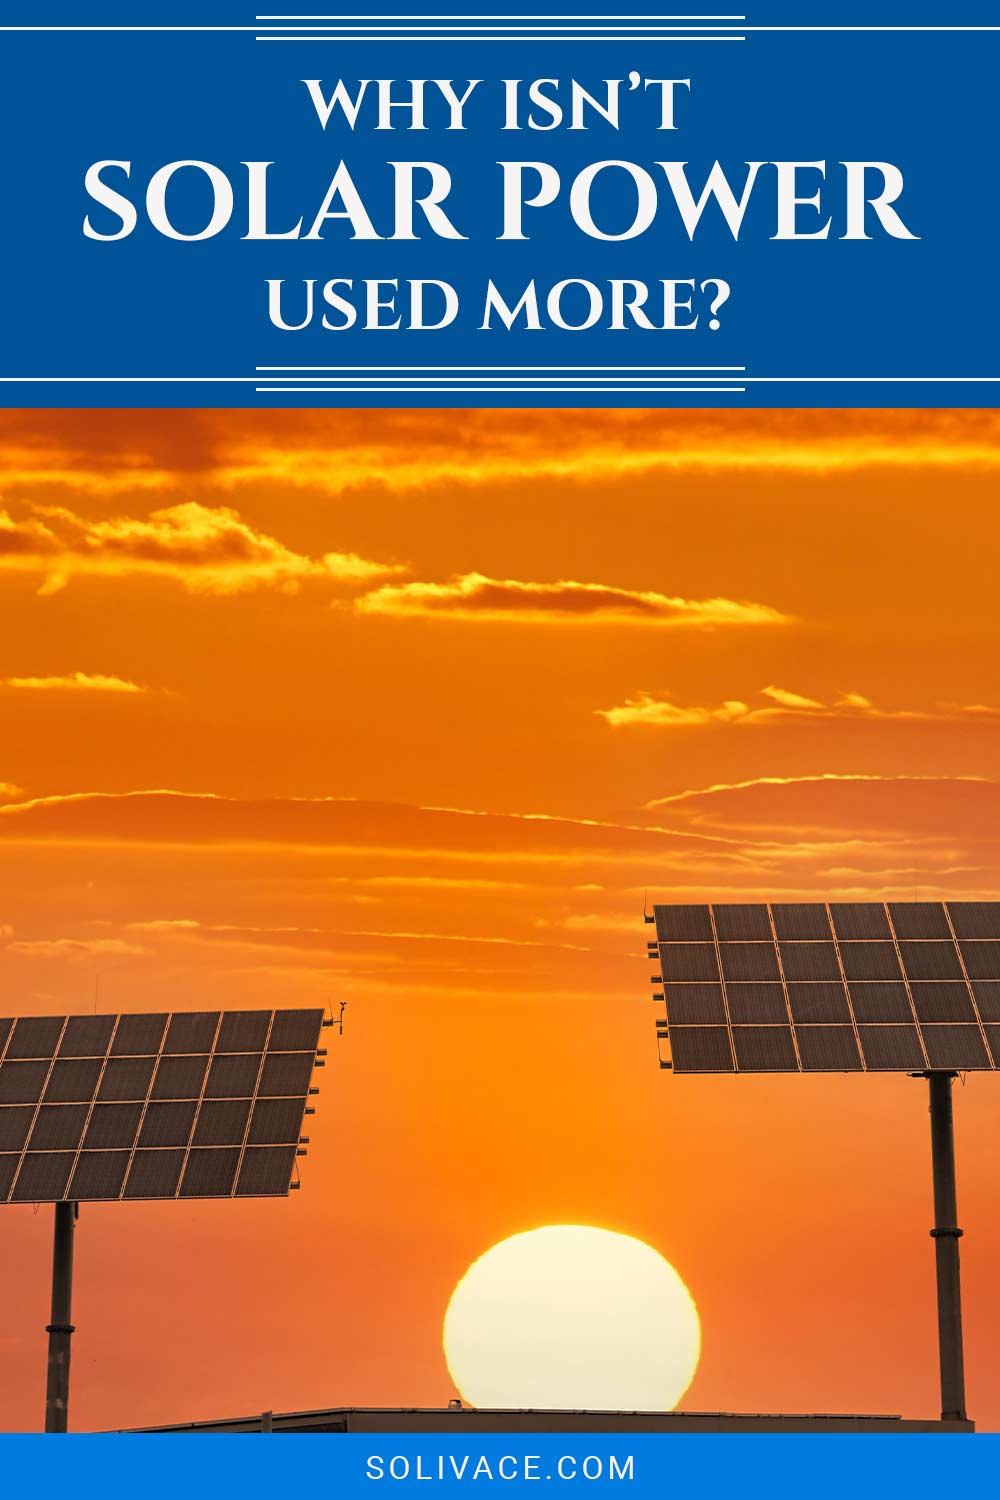 Sun setting behind big solar panels - Why Isn’t Solar Power Used More?